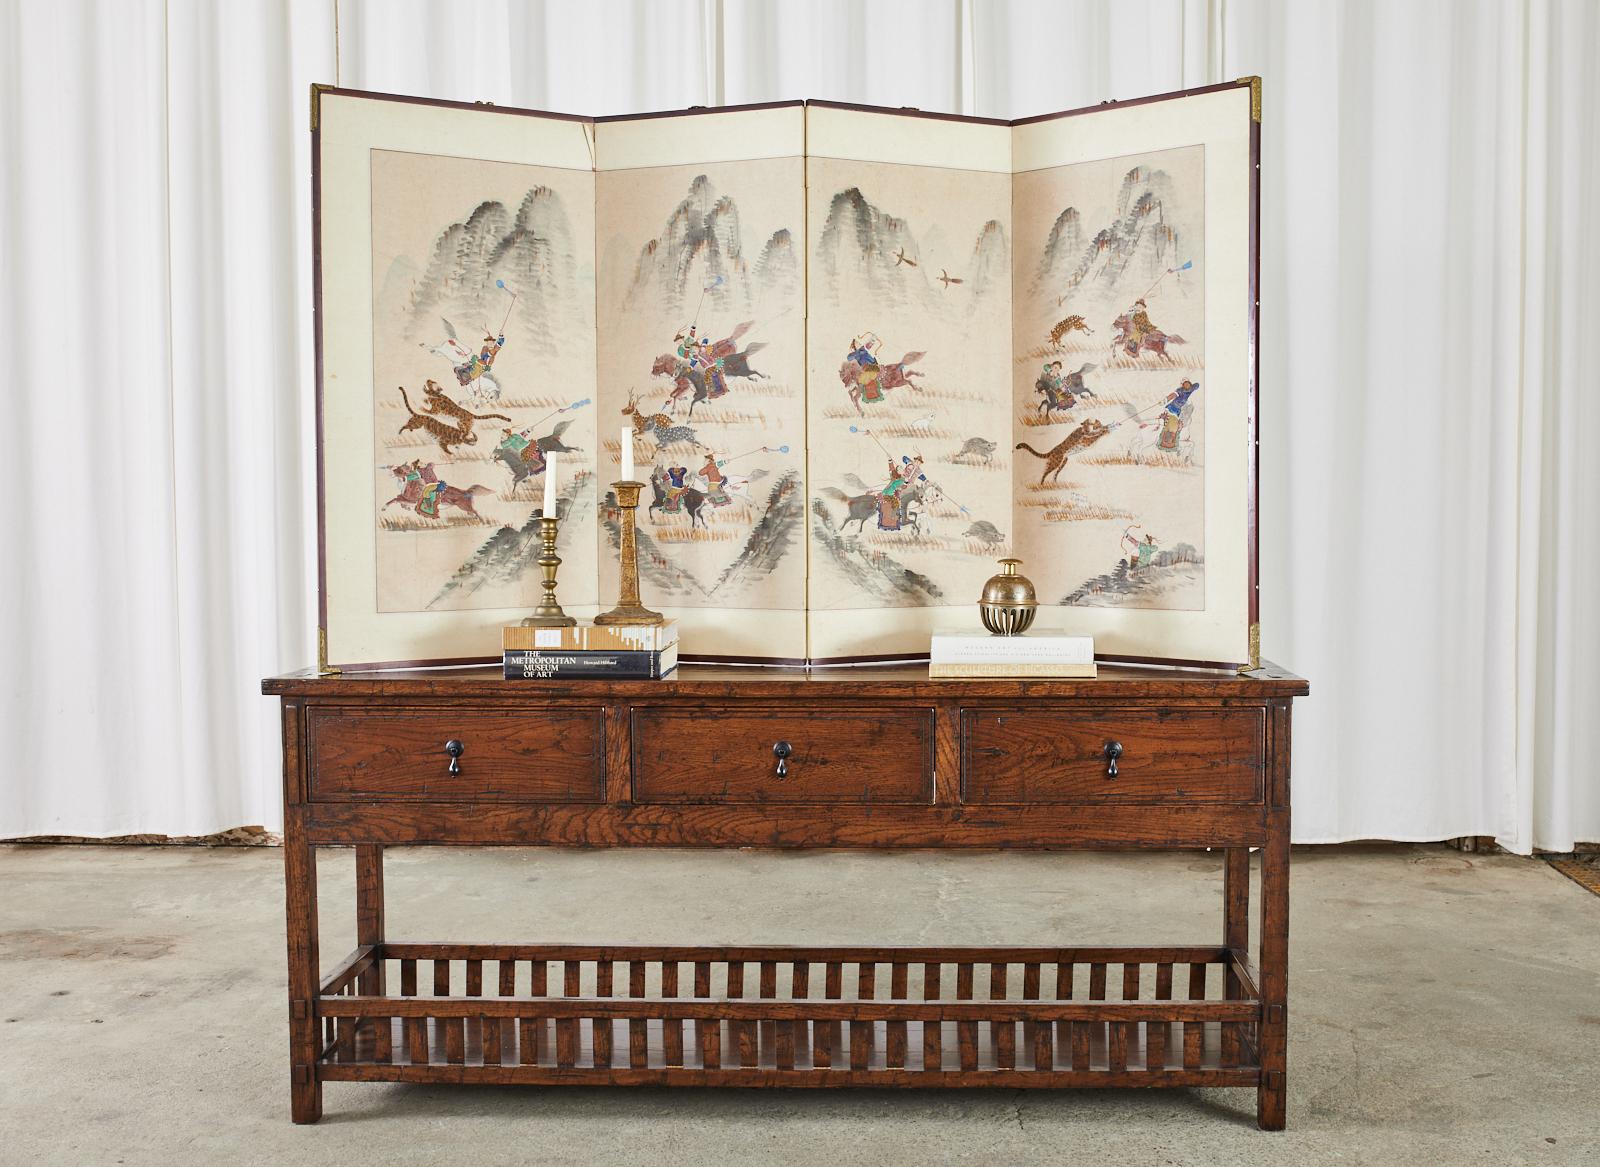 Magnificent Korean Showa period four-panel screen depicting hunting scenes with tartars in a mountain landscape. The screen is decorated with vibrant ink and natural color pigments on hand-crafted paper. Probably from the period of the Japanese